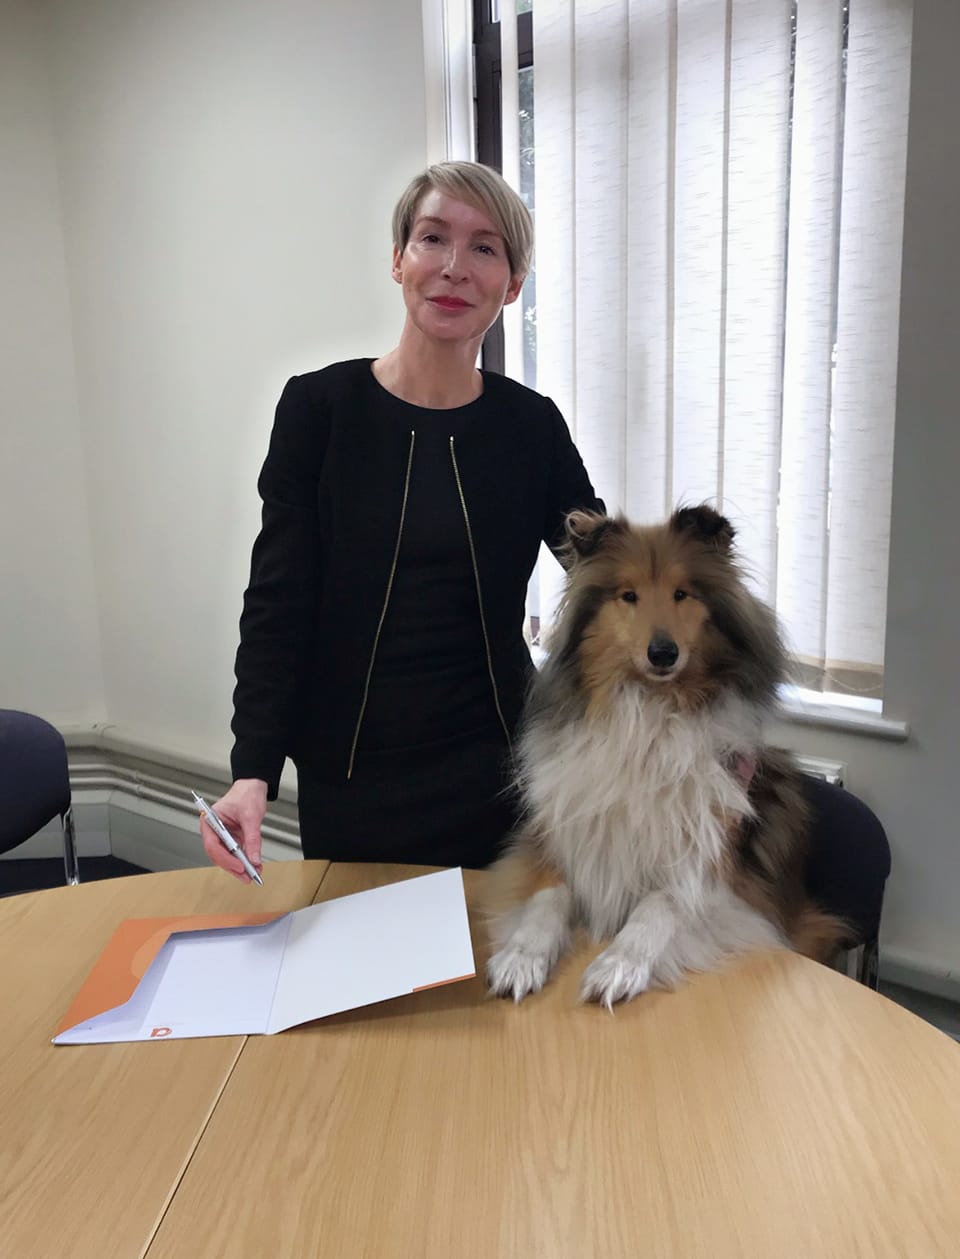 Aaron & Partners launches new employment law service to ensure equal 'oppawtunities' for animals